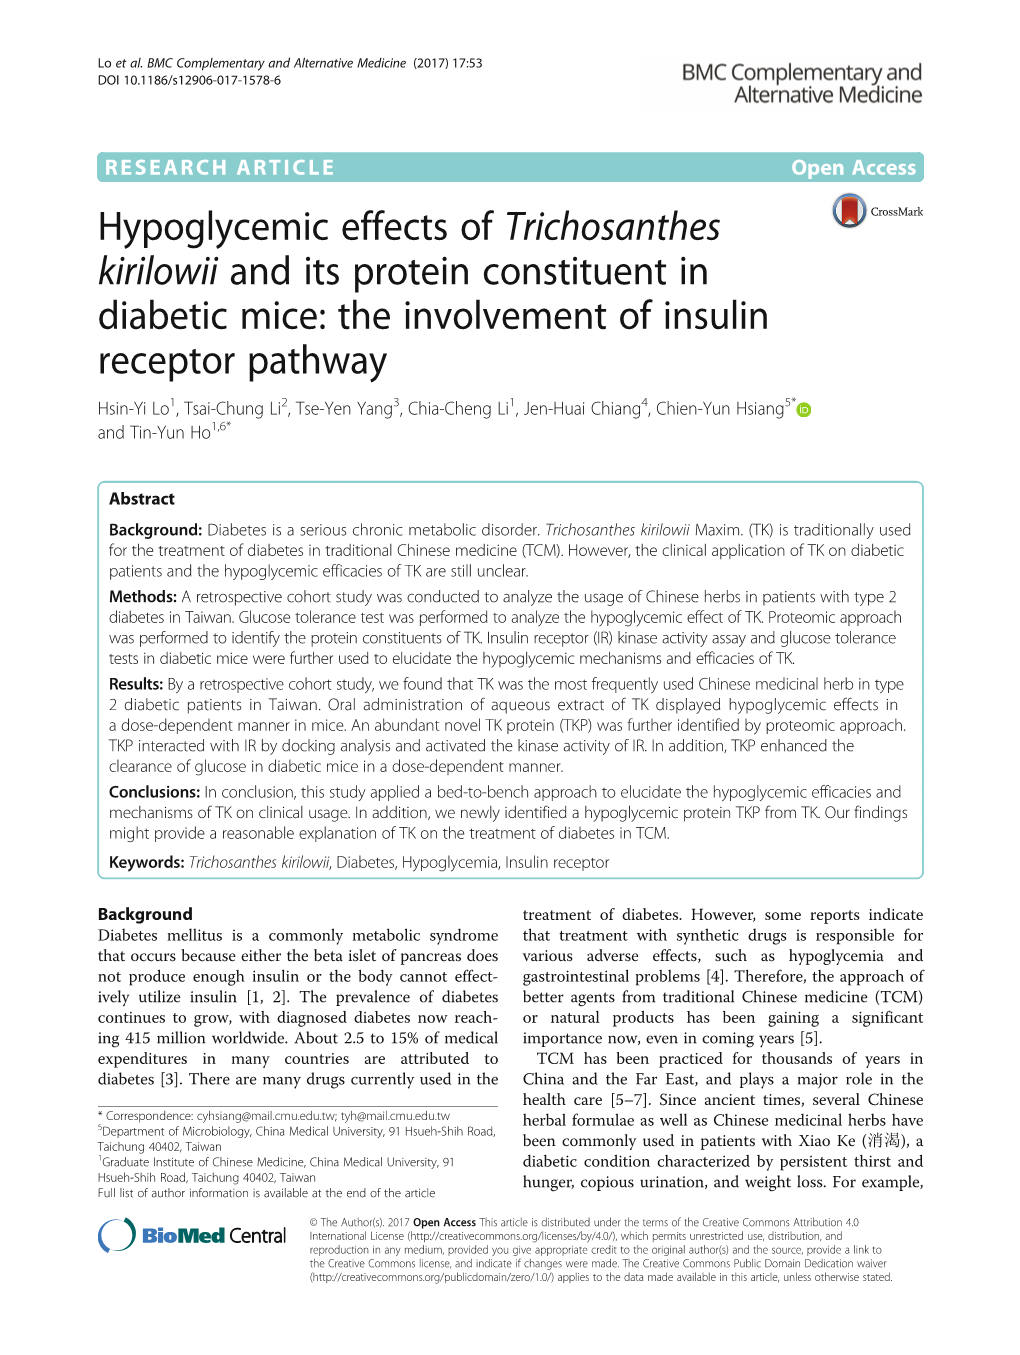 Hypoglycemic Effects of Trichosanthes Kirilowii and Its Protein Constituent